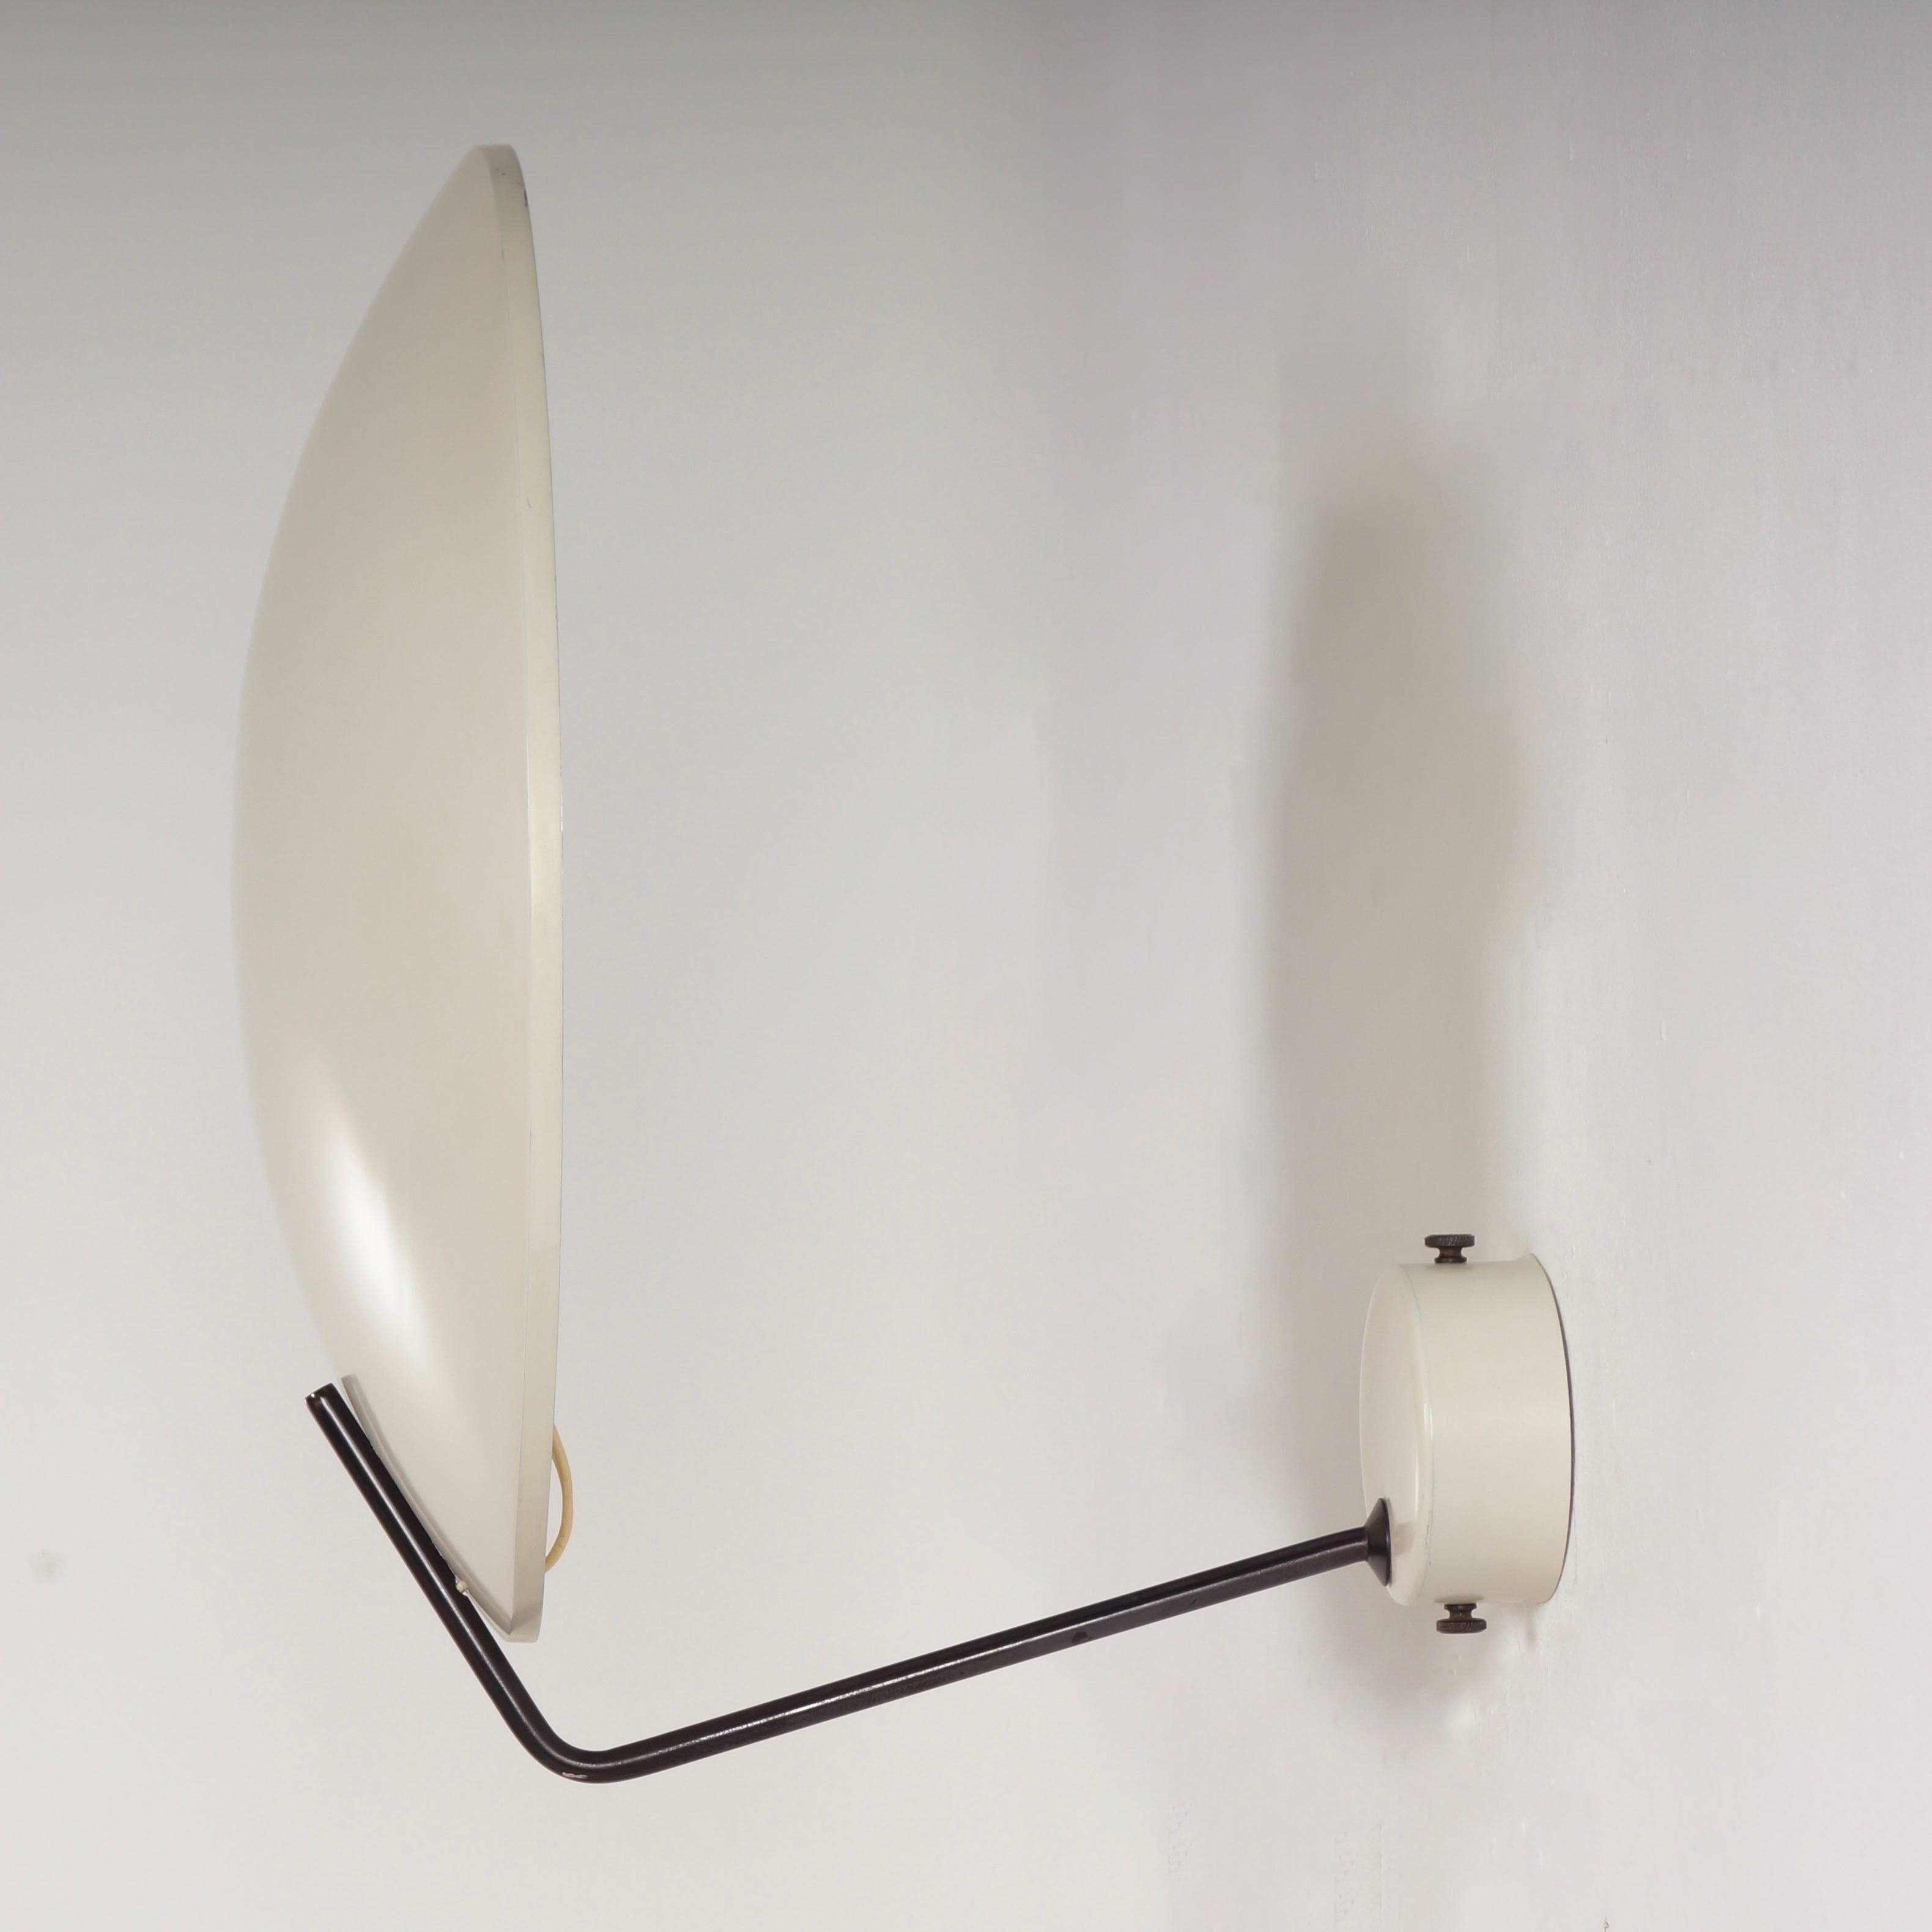 Rare Italian wall or ceiling model 232 designed by Bruno Gatta for Stilnovo in circa 1962. The design was very progressive for its time. This wall lamp is +/- 60 years old, but still fits perfectly in timeles interiors. Considering its age this lamp